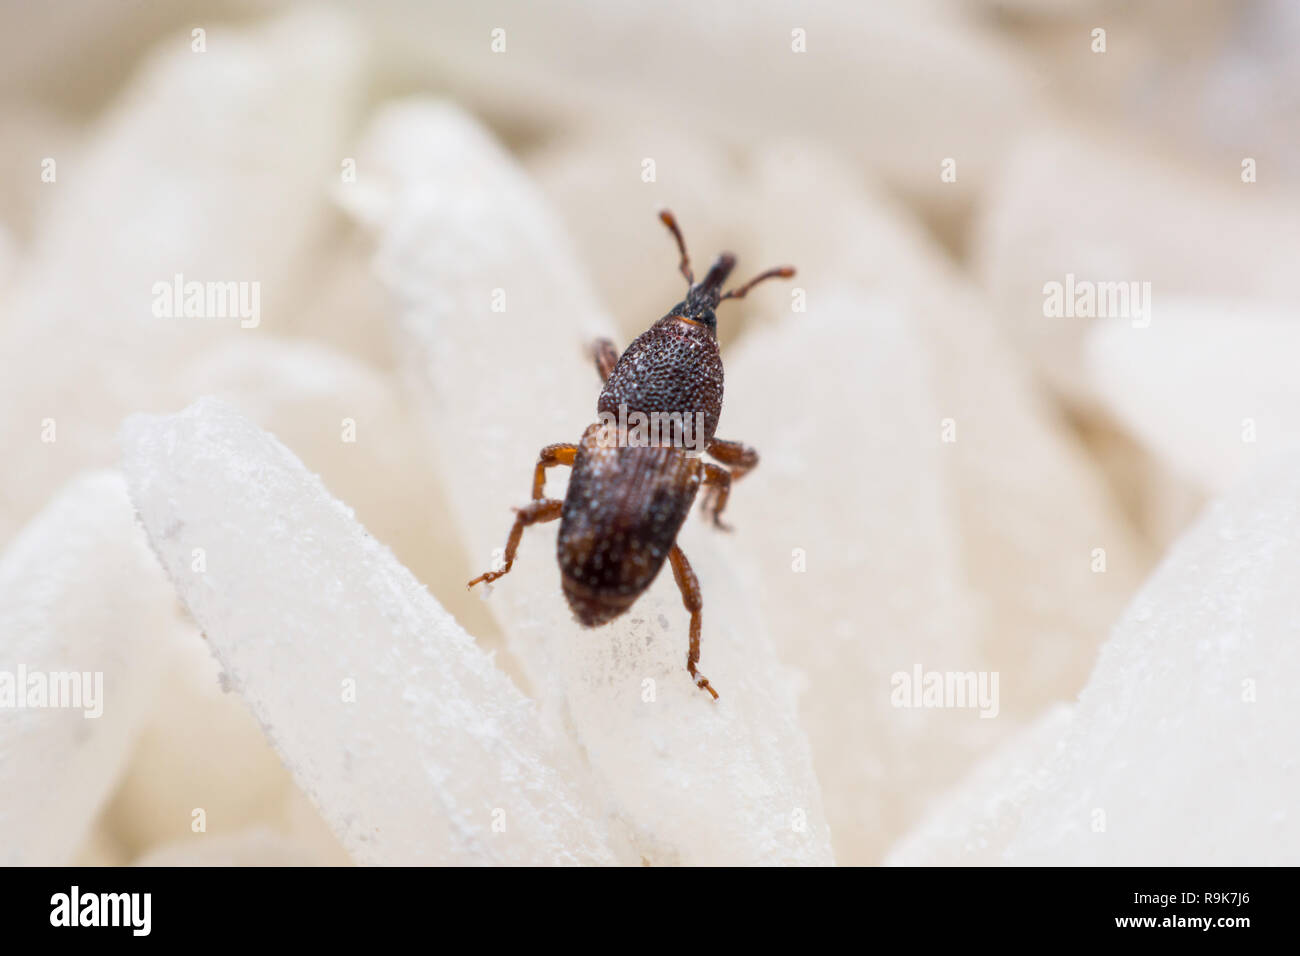 Rice weevil, or science names Sitophilus oryzae close up on white Rice destroyed. Stock Photo